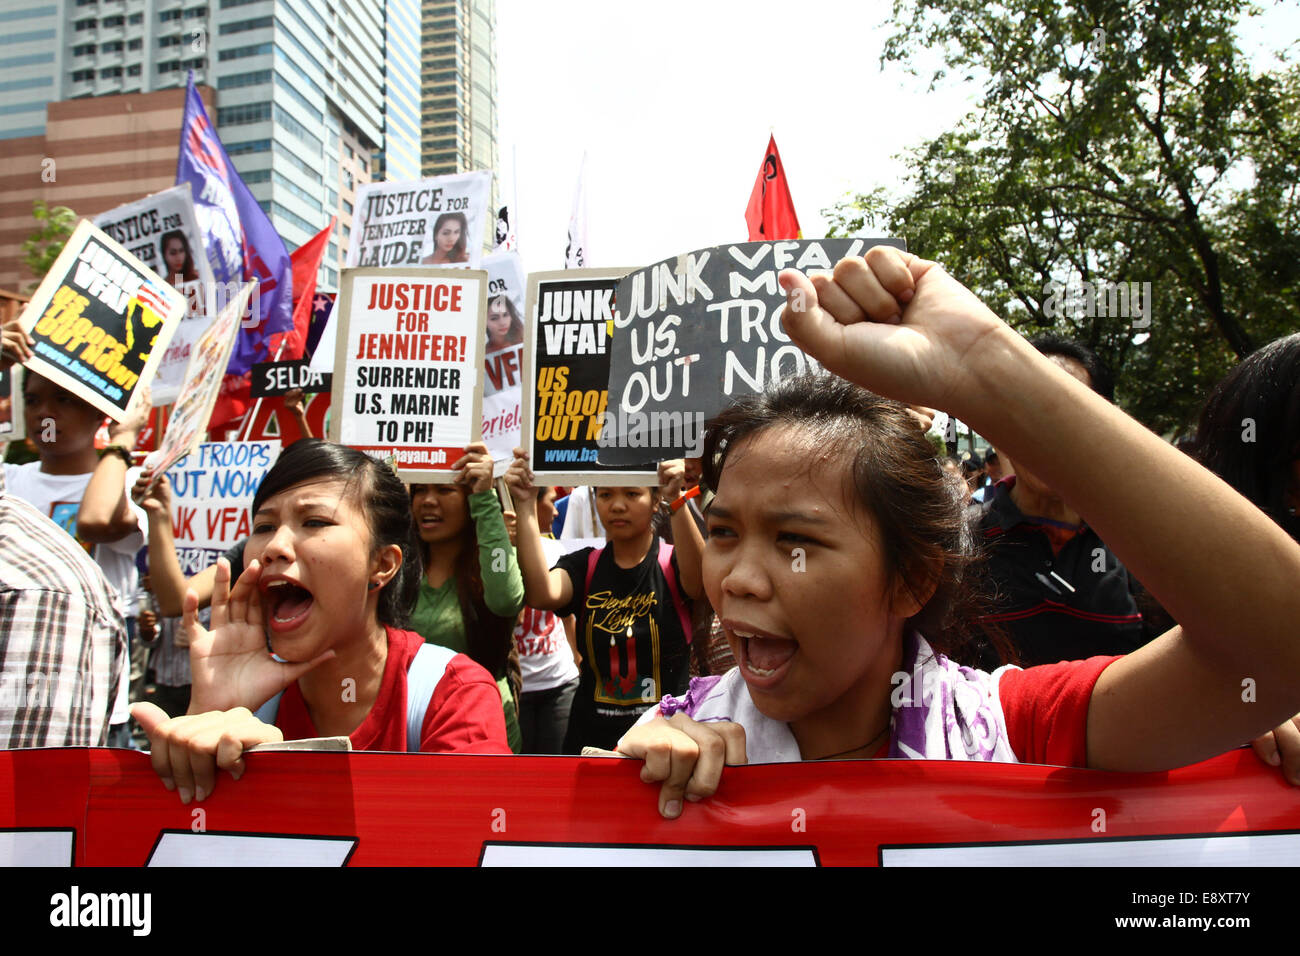 Manila, Philippines. 16th Oct, 2014. Activists shout slogans during a protest rally in front of the US Embassy in Manila, Philippines, Oct. 16, 2014. The protesters demand justice for Jeffrey Laude, who was suspected to be killed by US Marine Joseph Scott Pemberton last Saturday in Olongapo City. Credit:  Rouelle Umali/Xinhua/Alamy Live News Stock Photo